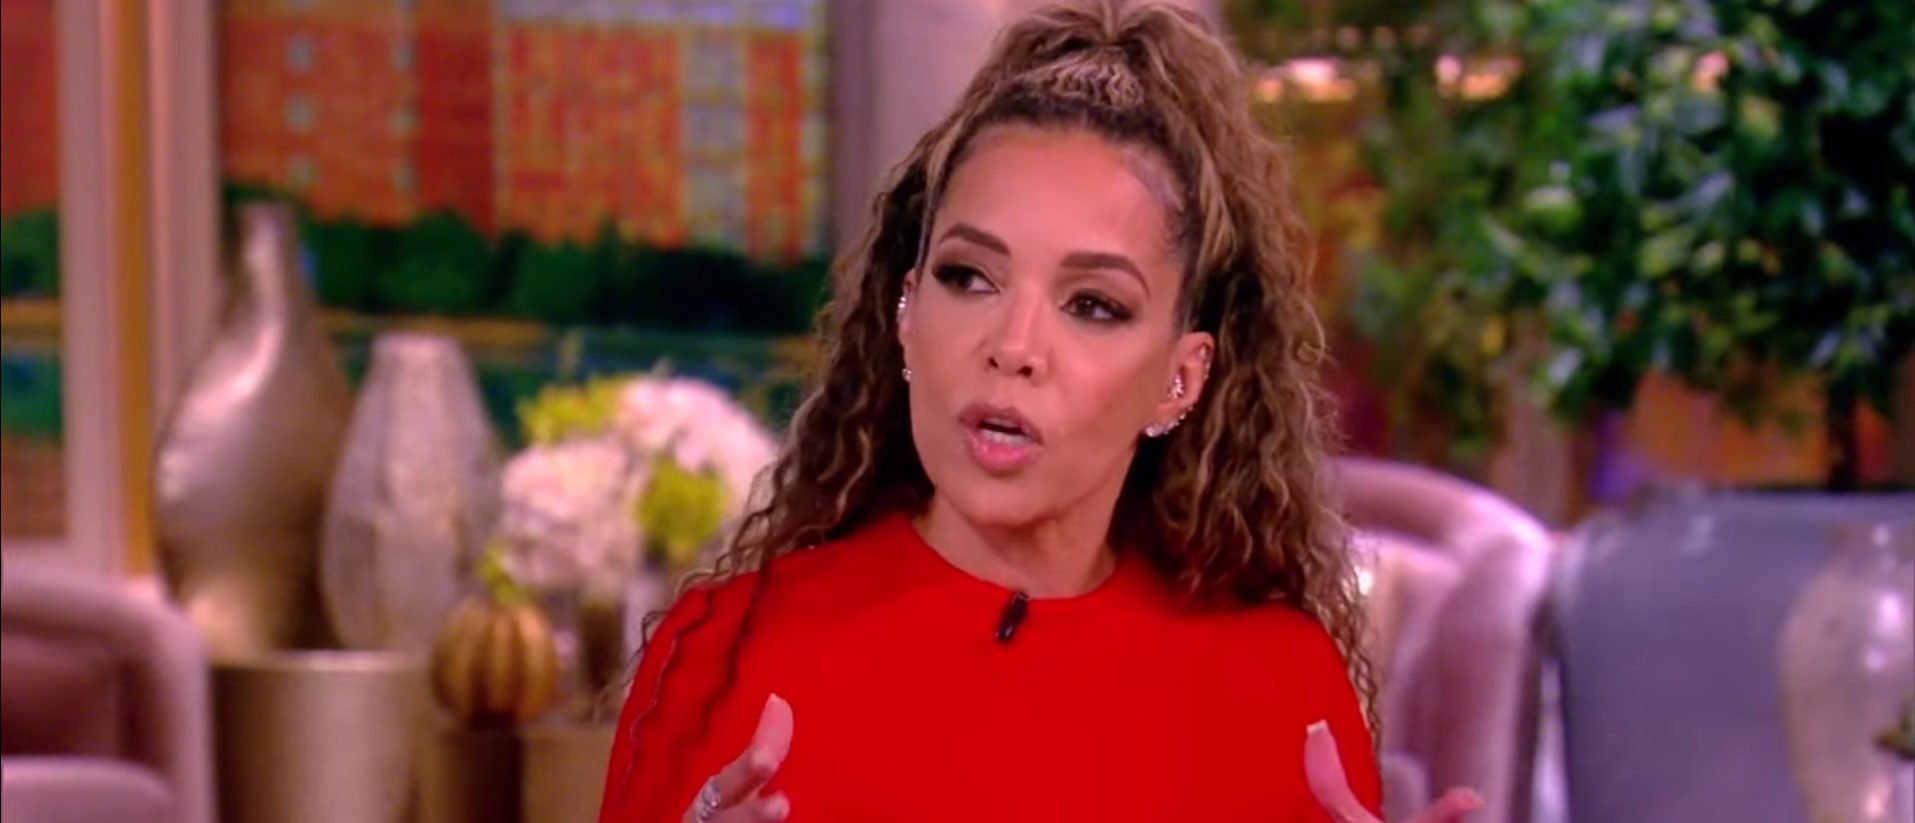 ‘Looked Straight At My Chest: Sunny Hostin Claims She Covered Her Curves To Be Taken Seriously